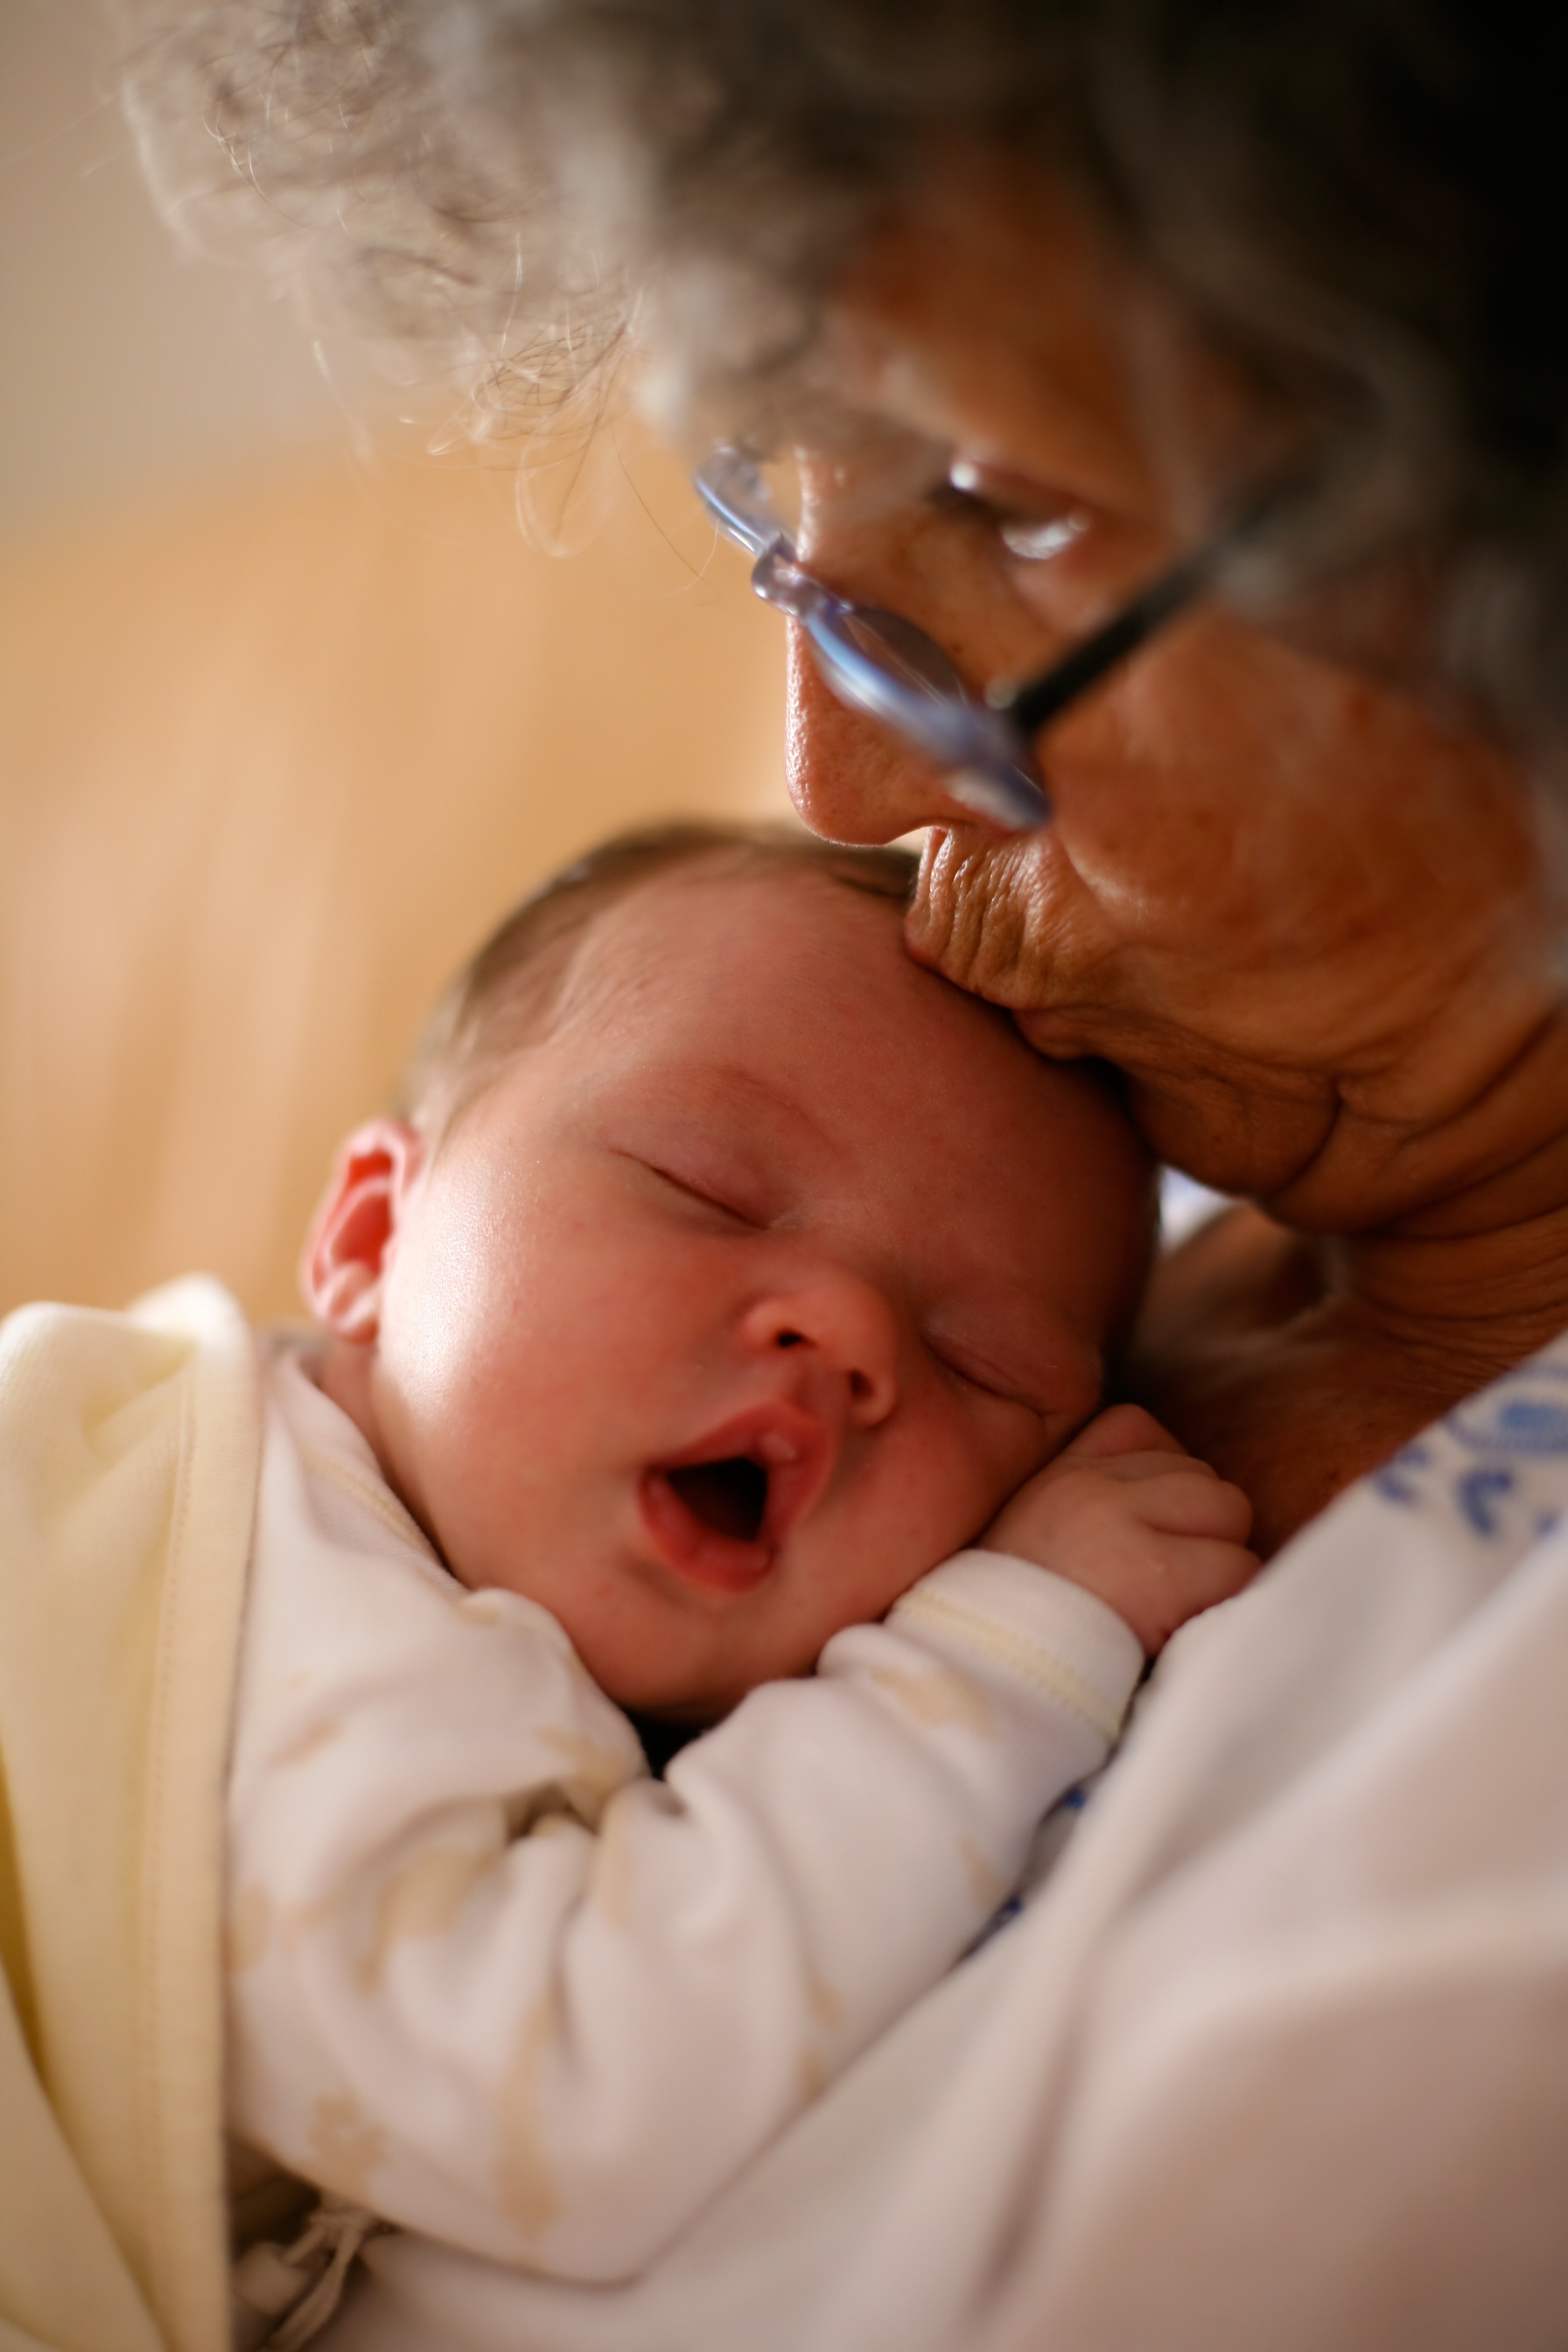 Grandma holding a baby and kissing it on it's head. | Source: Shutterstock